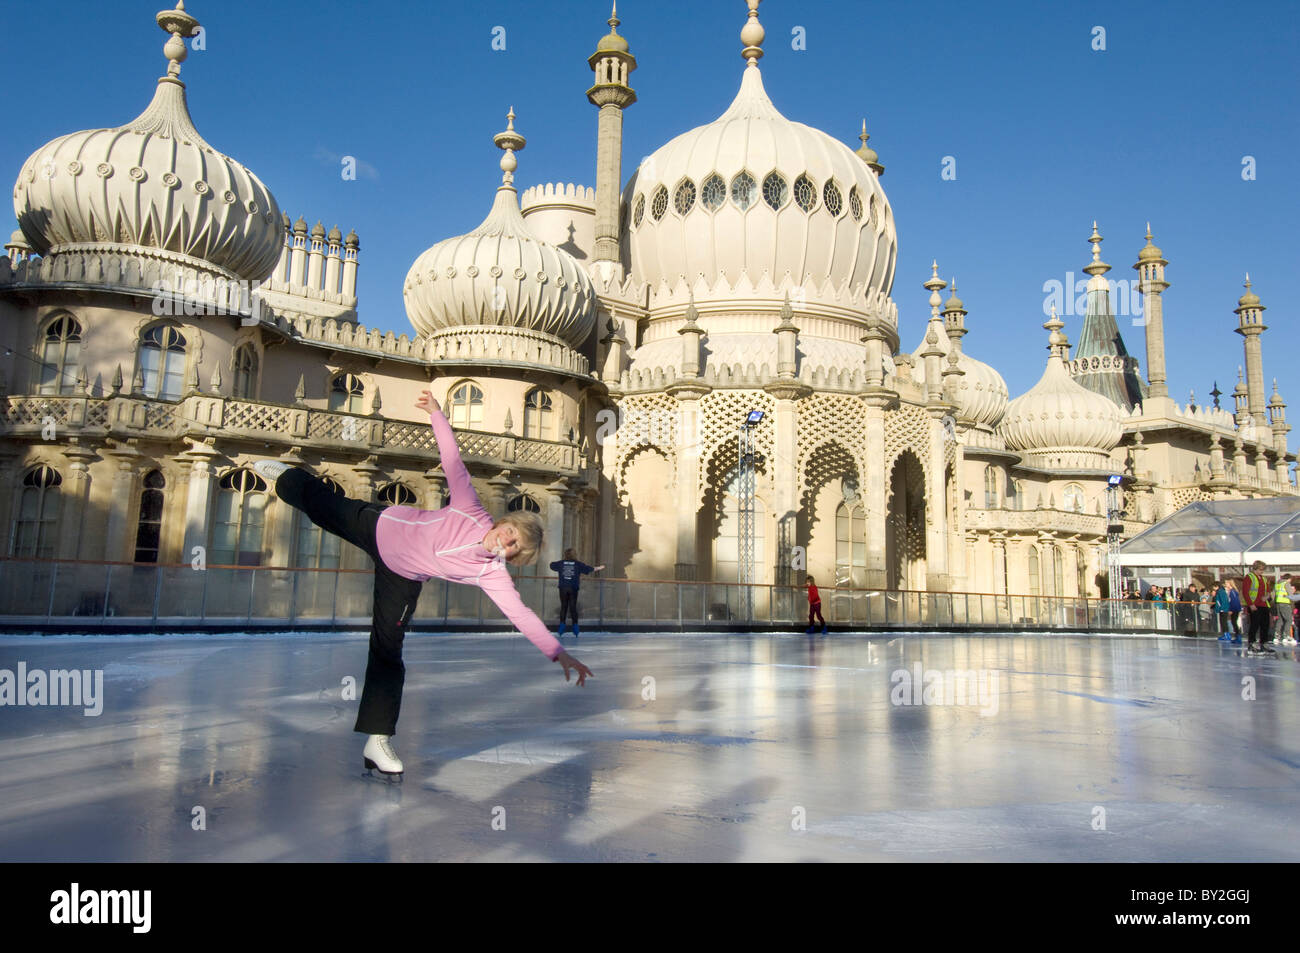 A woman skater on the temporary pop-up ice skating rink in front of the Brighton Royal Pavilion. Stock Photo